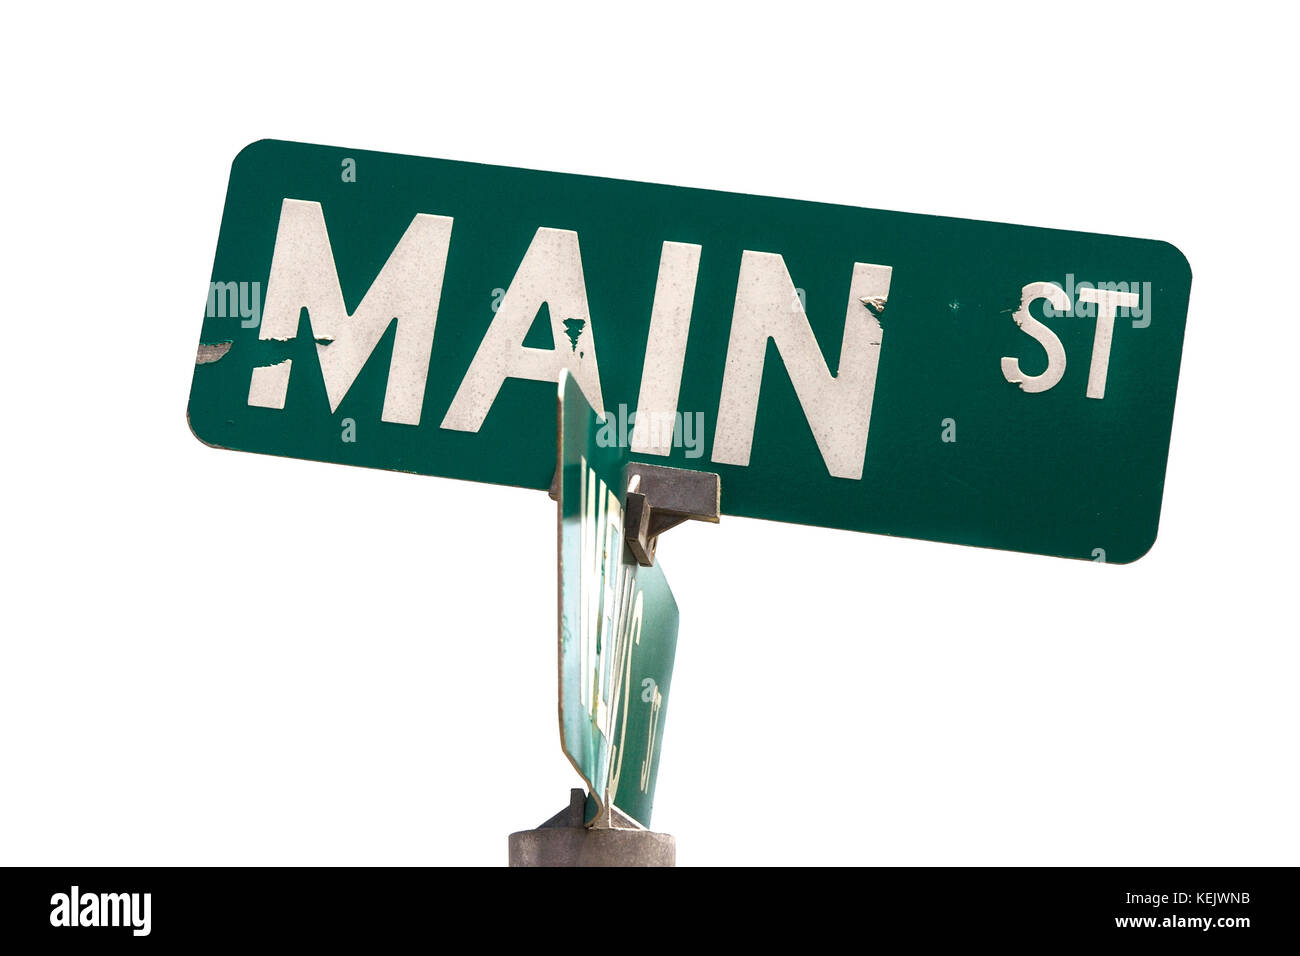 Hard times on Main Street sign. Roughed up MAIN STREET sign. Bent. Peeling paint. Isolated. Stock Photo